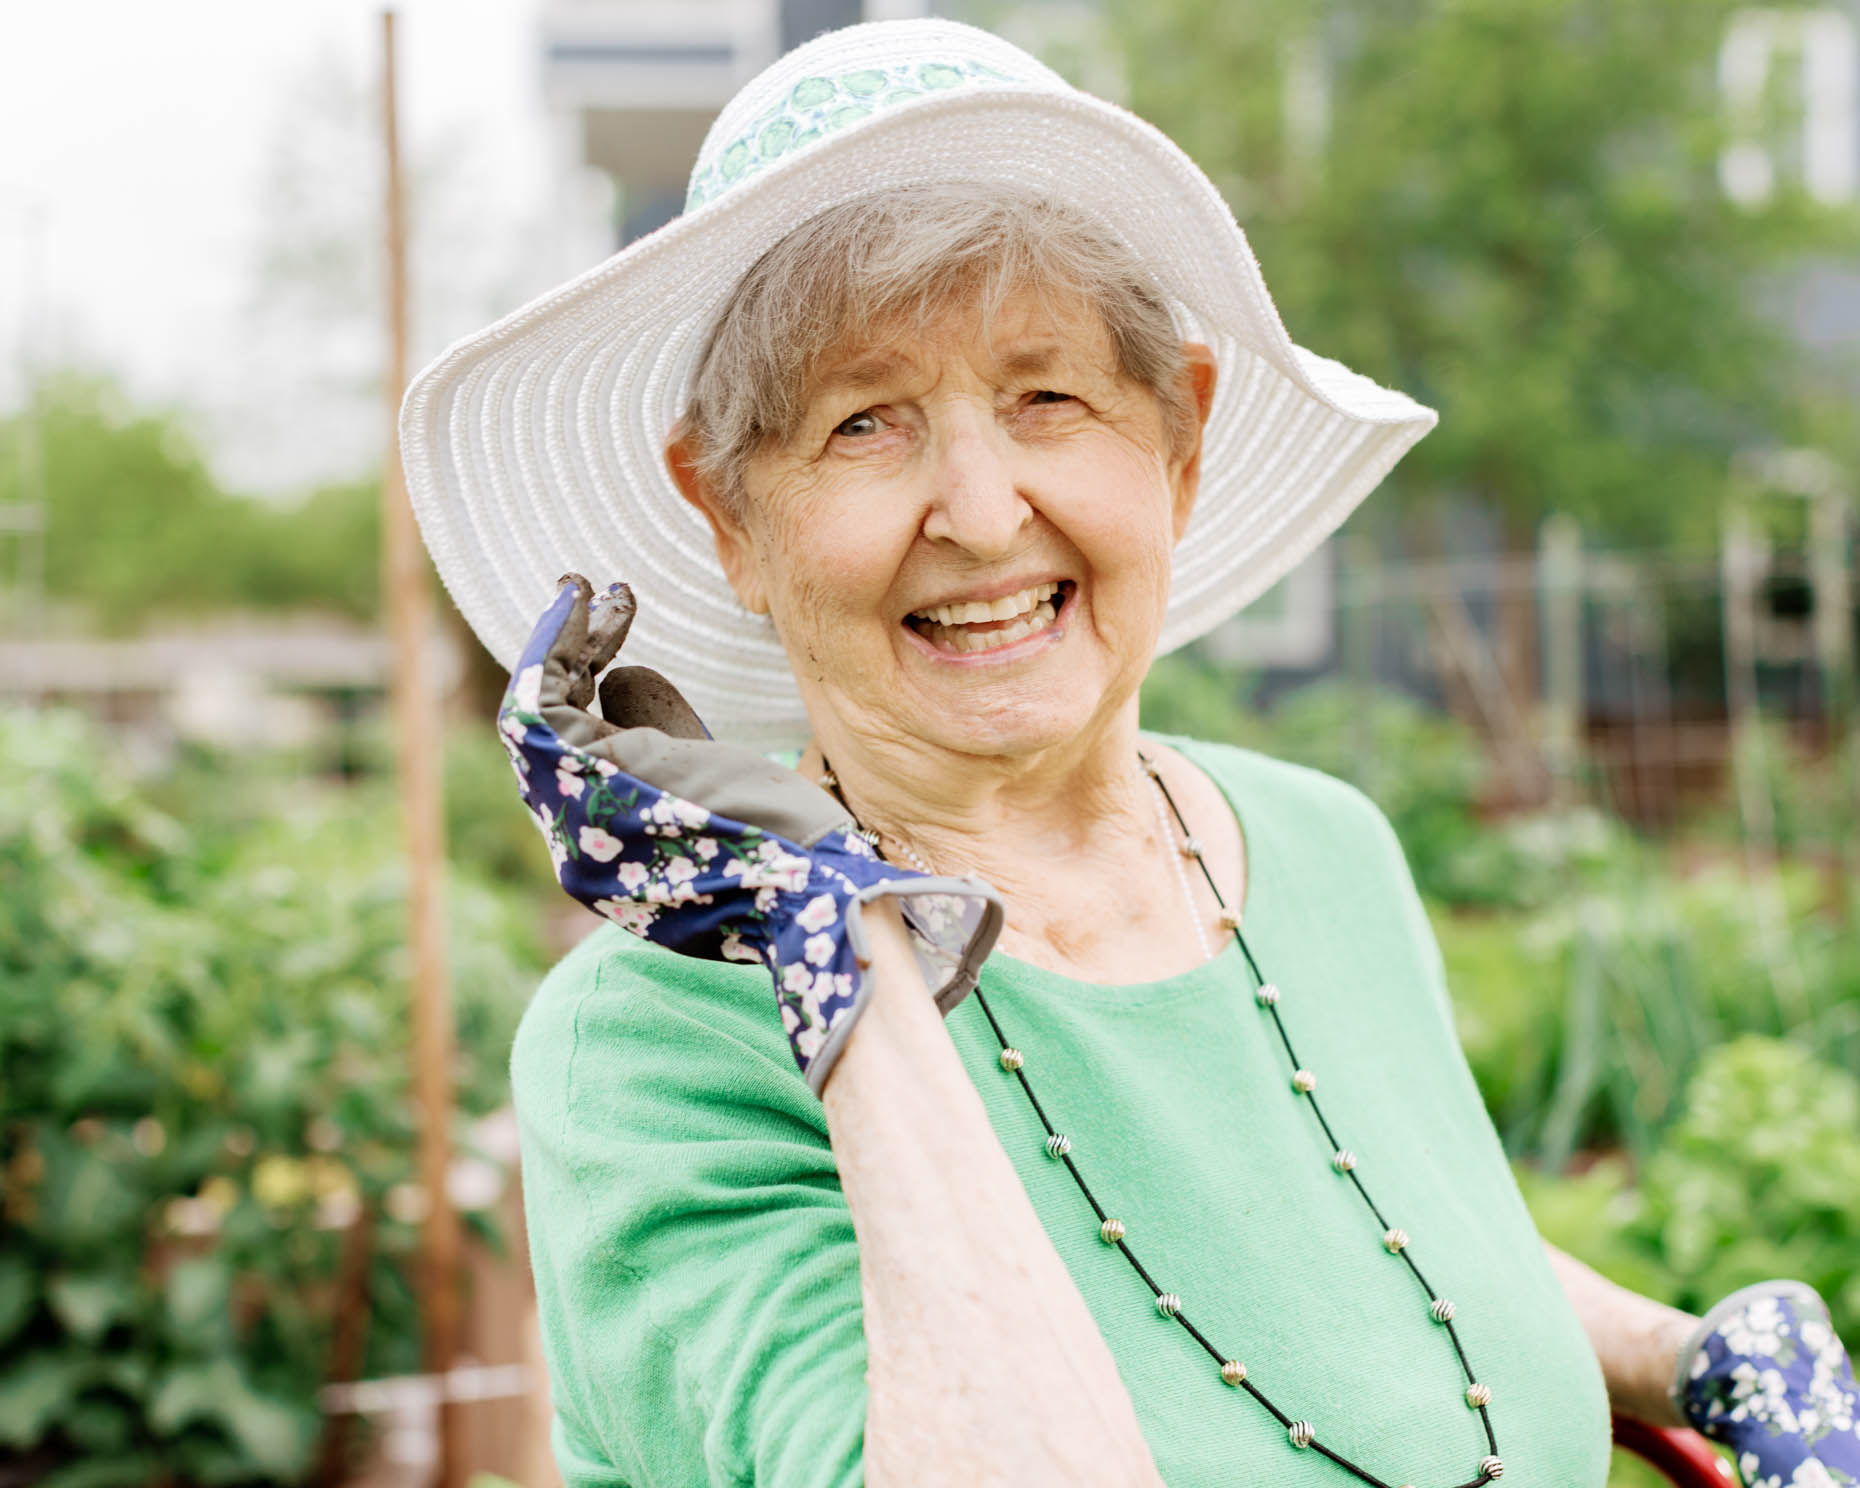 Natural portrait of a retired woman wearing green shirt and garden hat working with plants at a retirement community